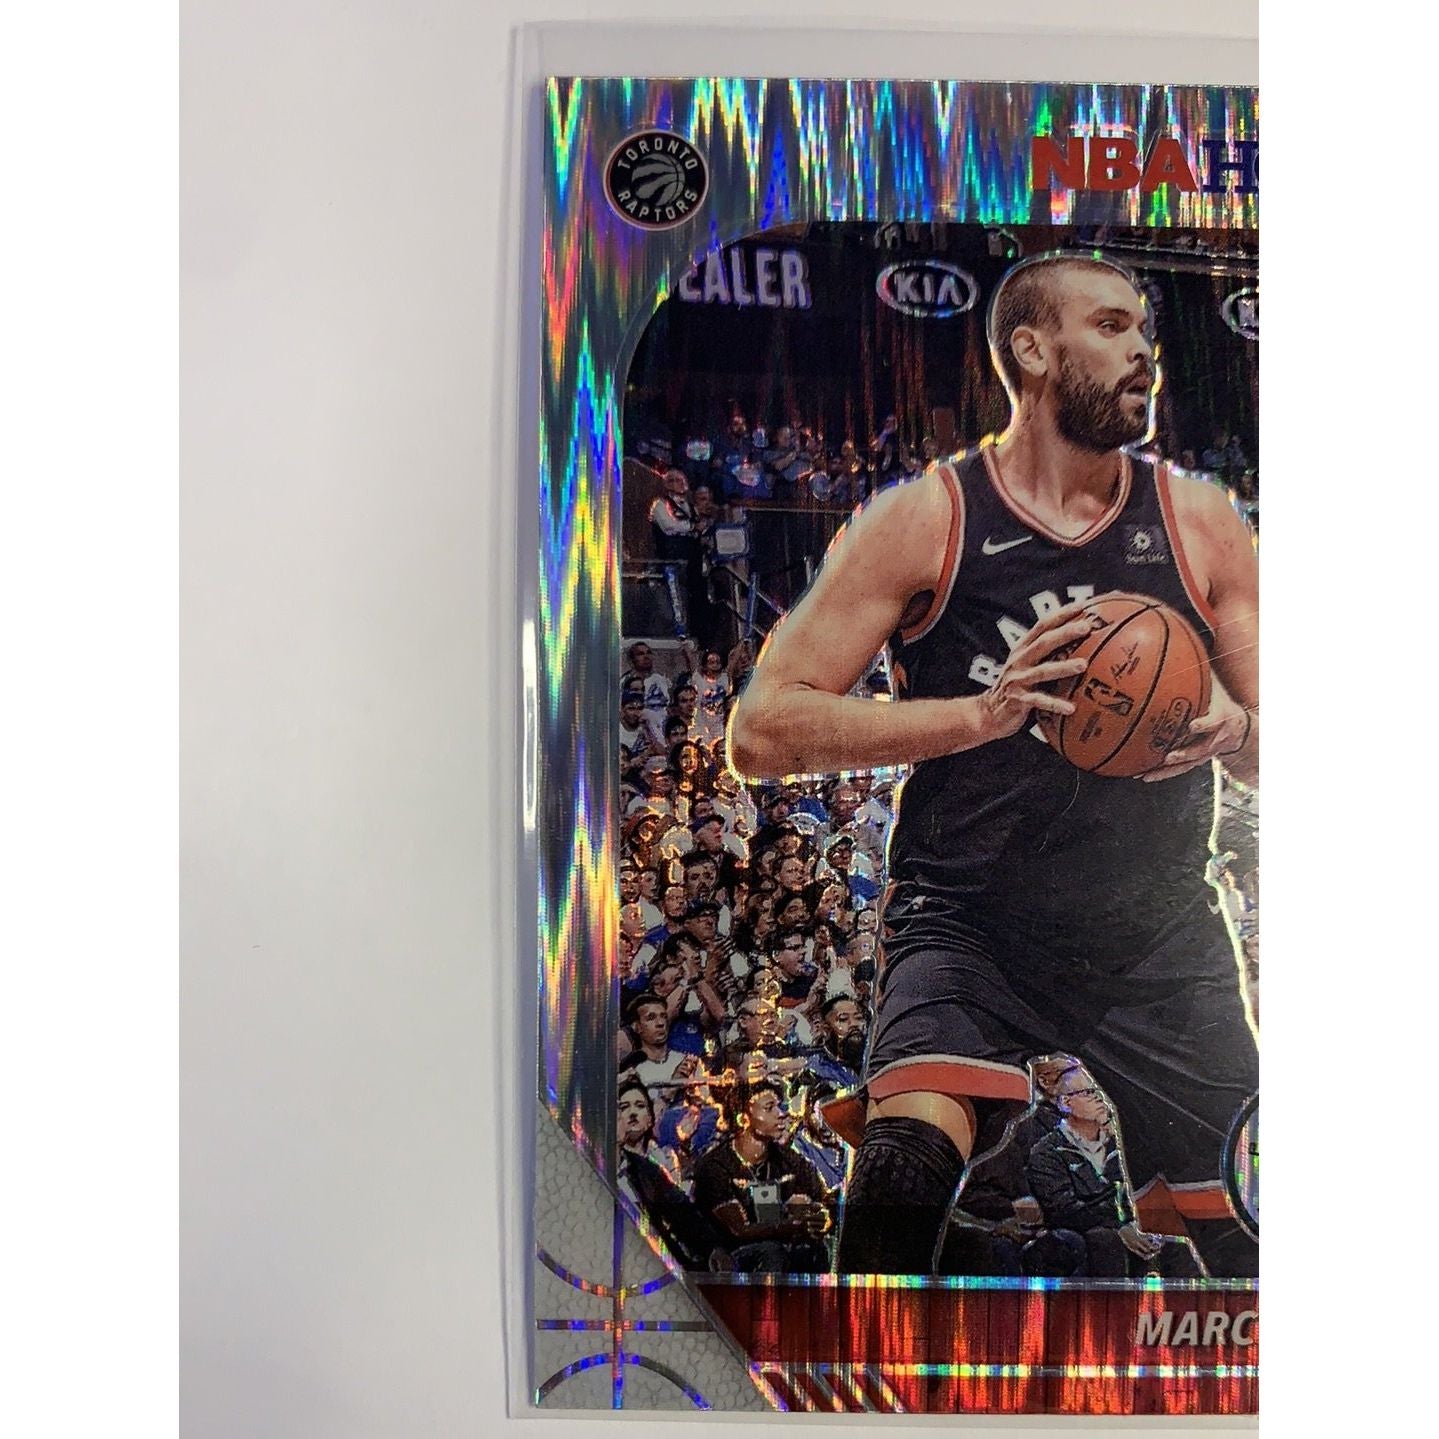  2019-20 Hoops Premium Stock Marc Gasol Hyper Flash Prizm  Local Legends Cards & Collectibles